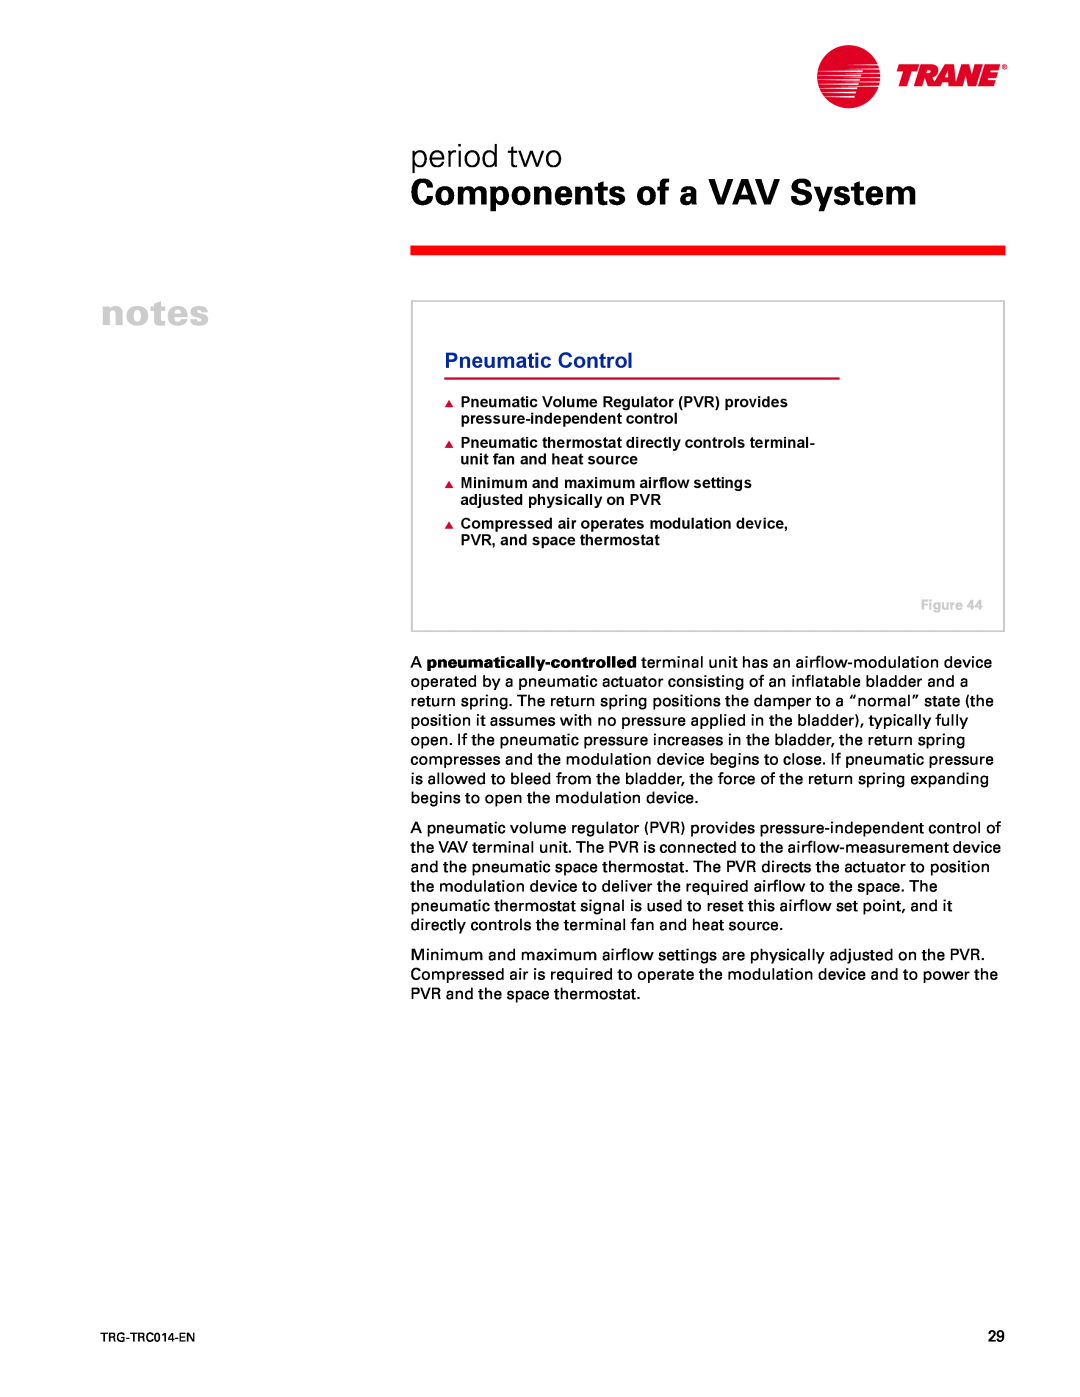 Trane TRG-TRC014-EN manual Pneumatic Control, Components of a VAV System, period two 